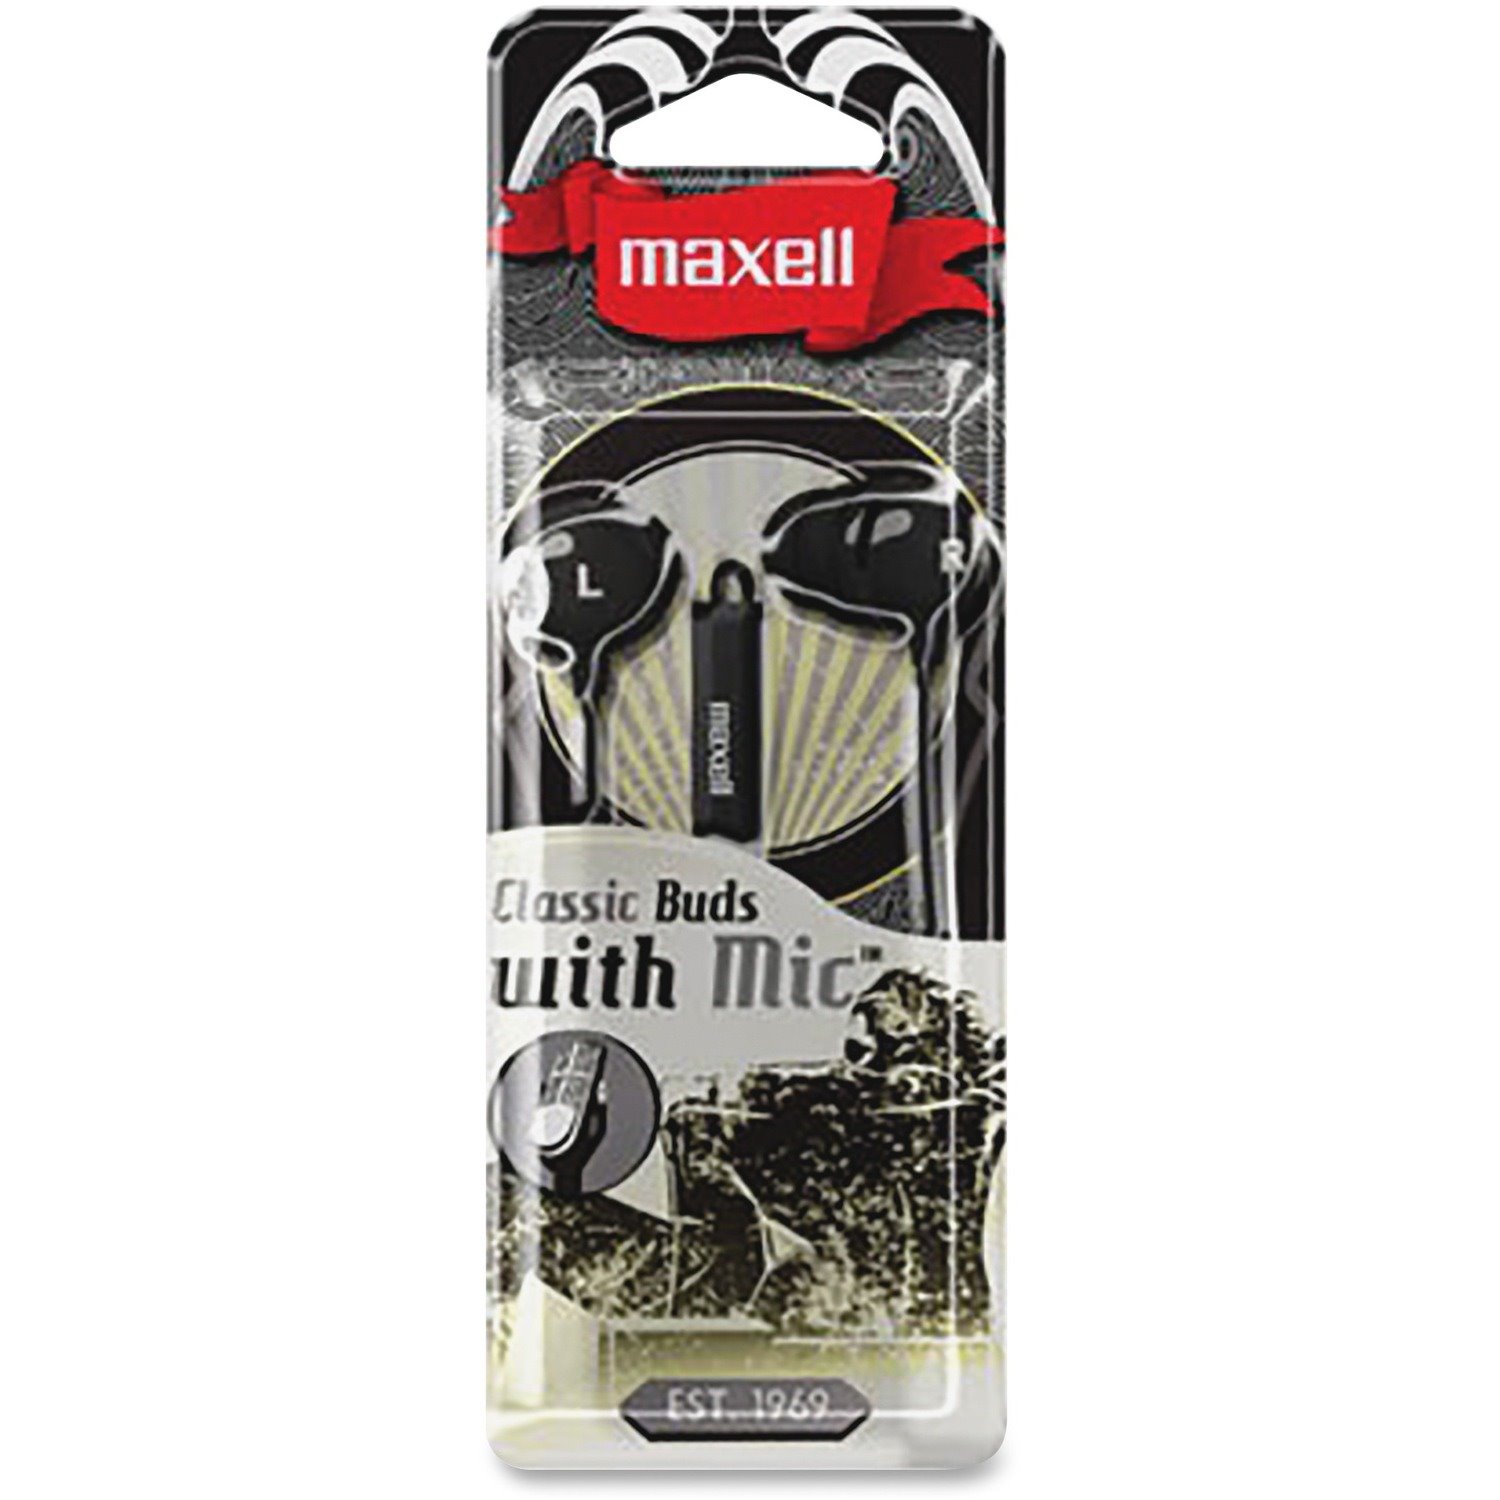 Maxell Classic Earbud with Mic Black